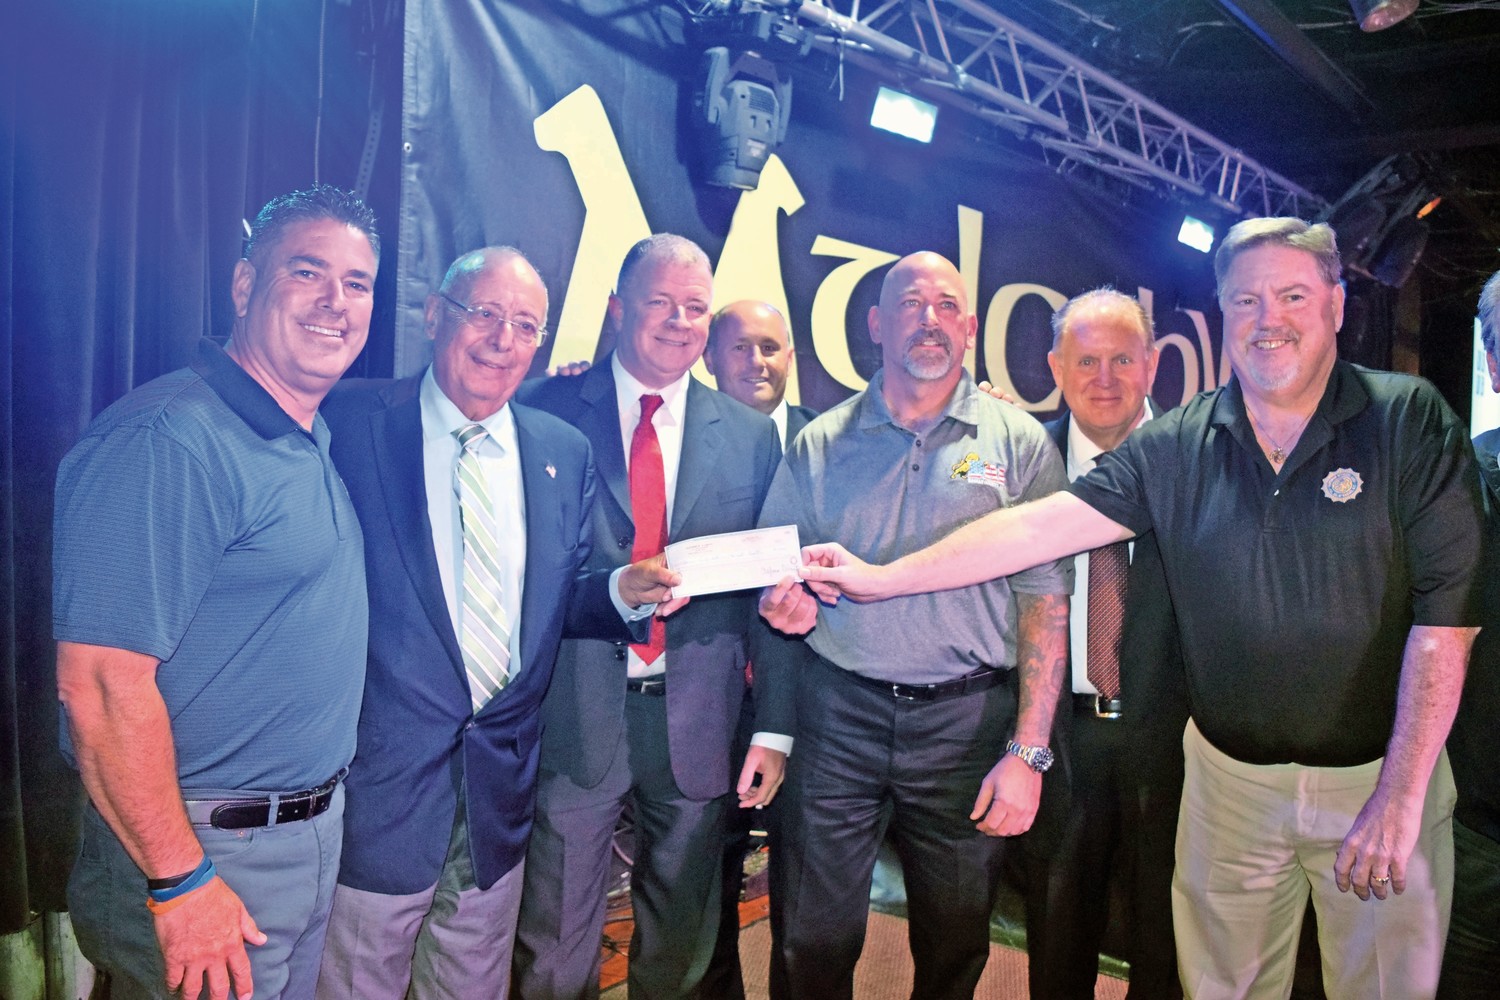 Nassau County Police unions held a fundraiser to help the victims of Hurricane Harvey at Mulcahy’s Pub and Concert Hall on Sept. 6, collecting more than $120,000. From left were Nassau County PBA President James McDermott; Al D’Amato, a former U.S. senator; COBA President Brian Sullivan; Police Commissioner Patrick Ryder; DAI President John Wighaus; John Murray, the owner of Mulcahy’s; and SOA President Kevin Black announced that D’Amato donated $50,000.